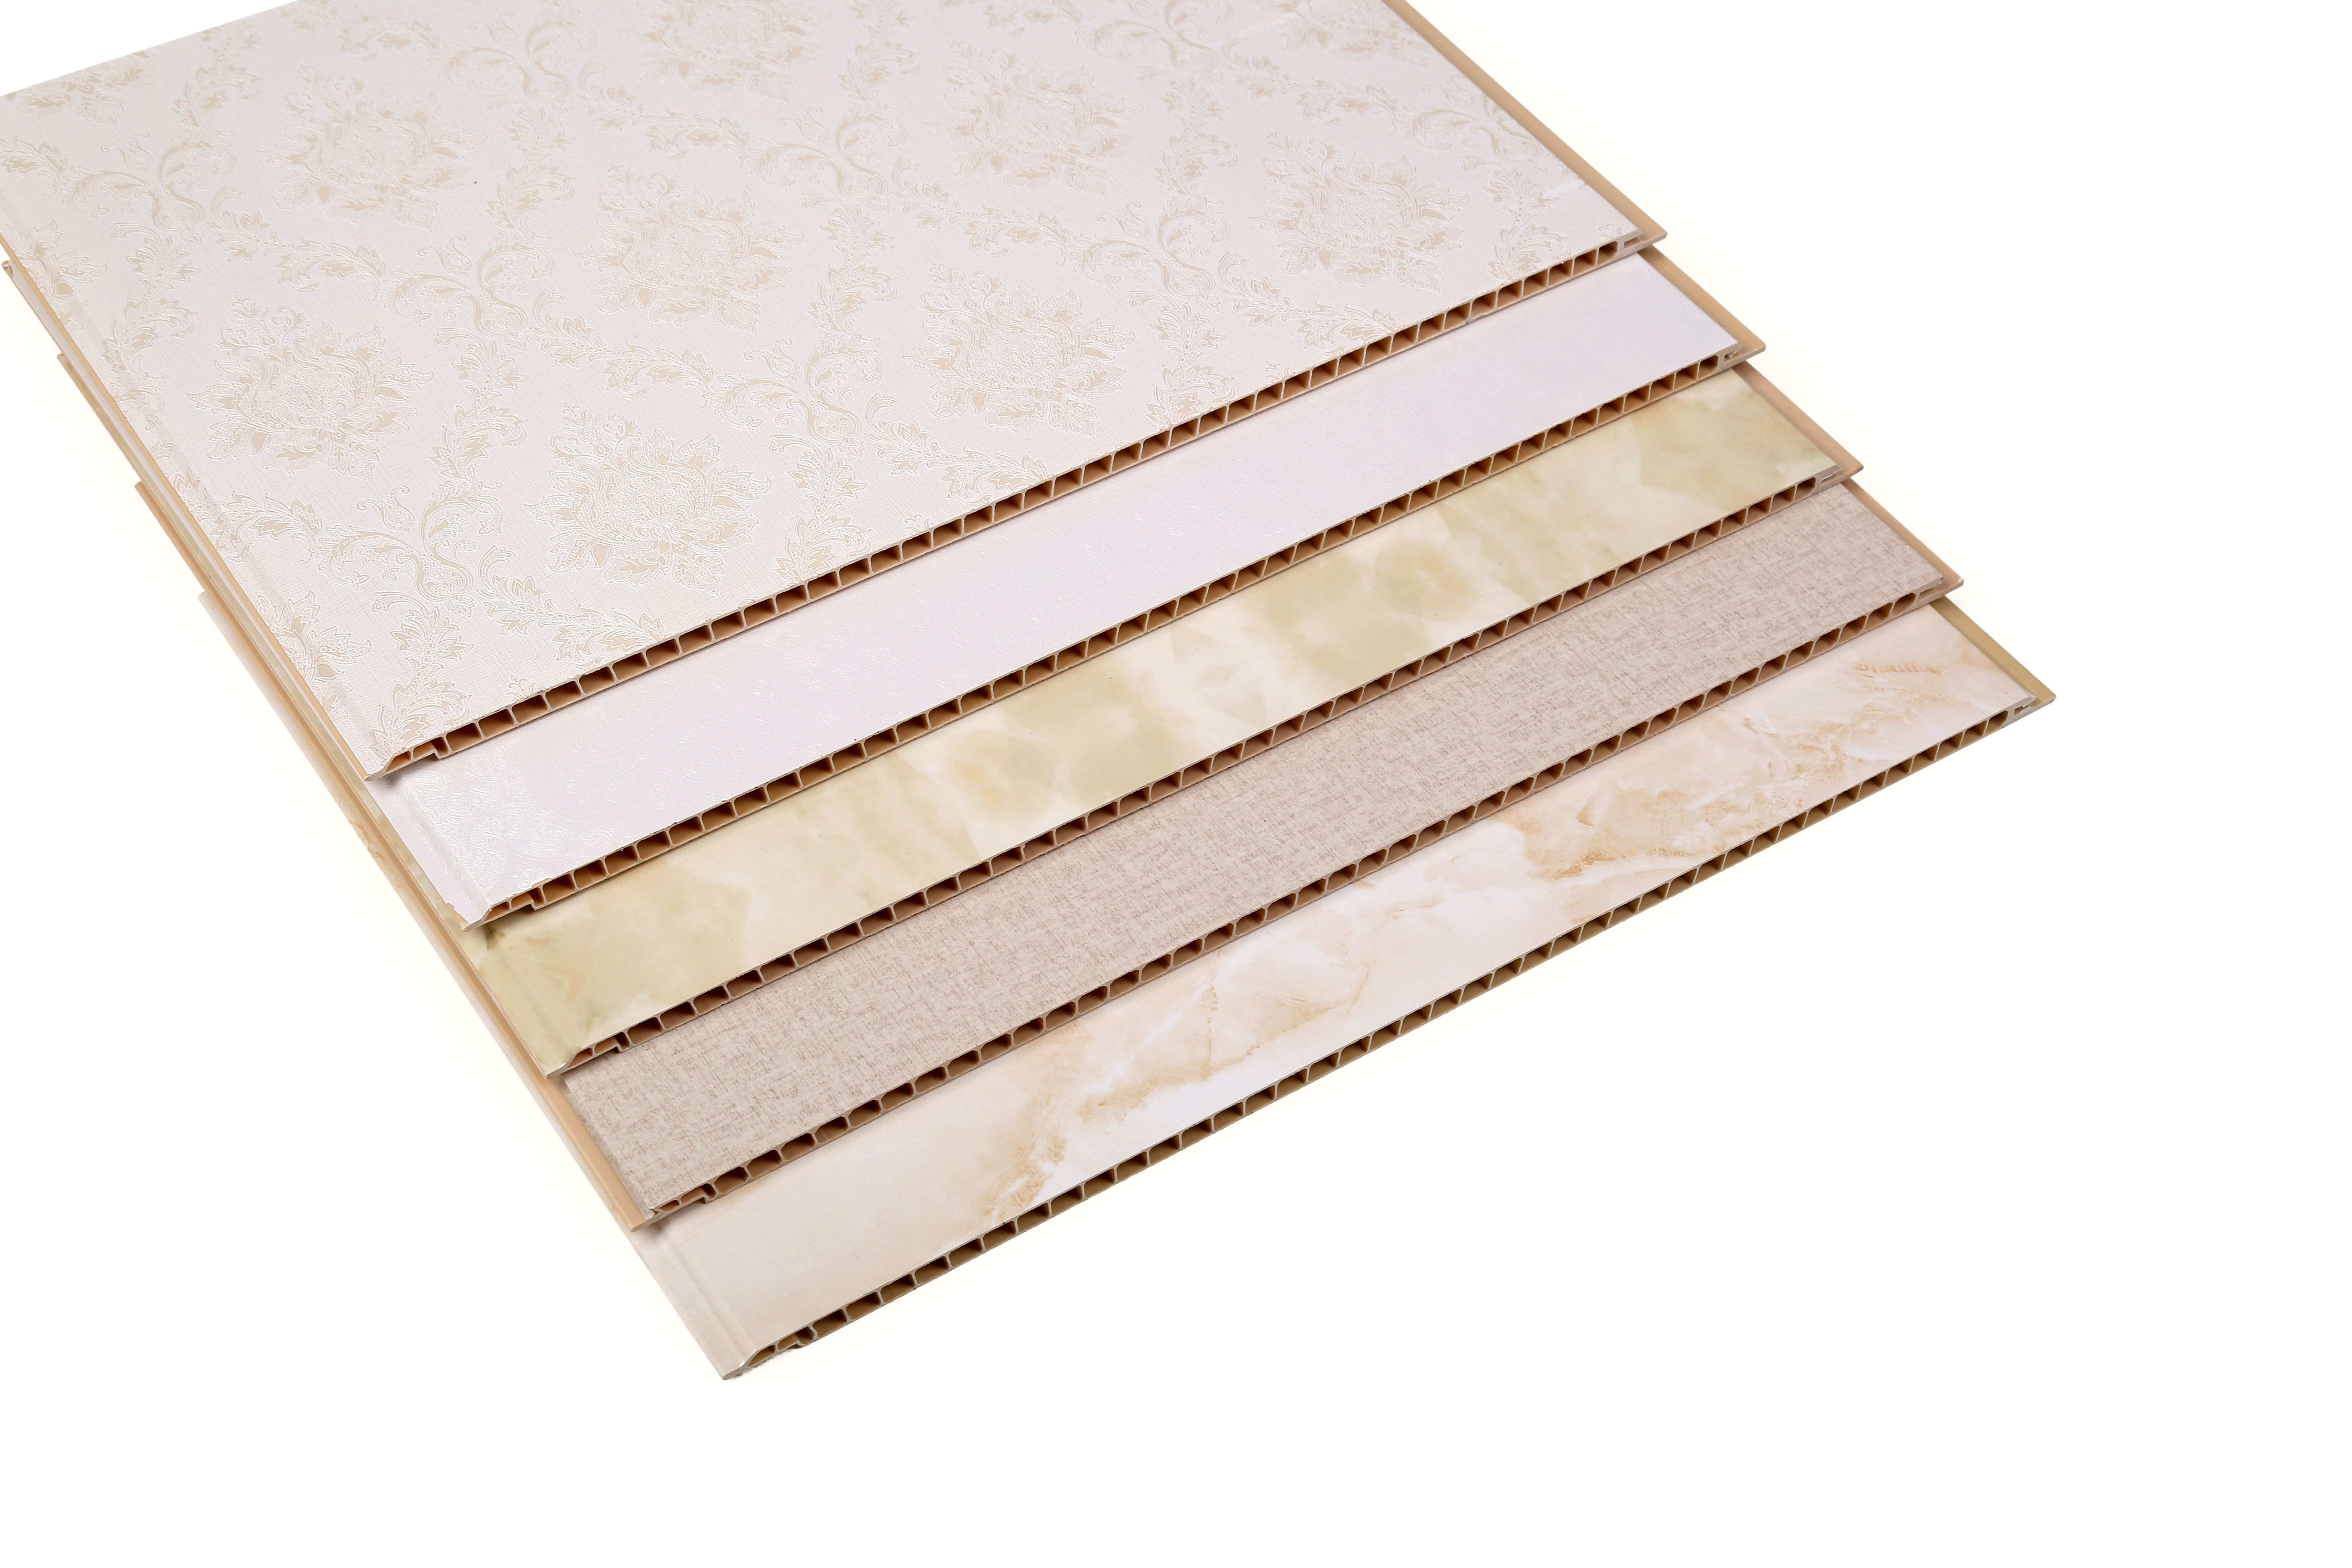 OEM/ODM Manufacturer Pvc Laminated Gypsum Ceiling Board -
 400*9mm,V groove/Flat  PVC Wall Panel – Chinatide